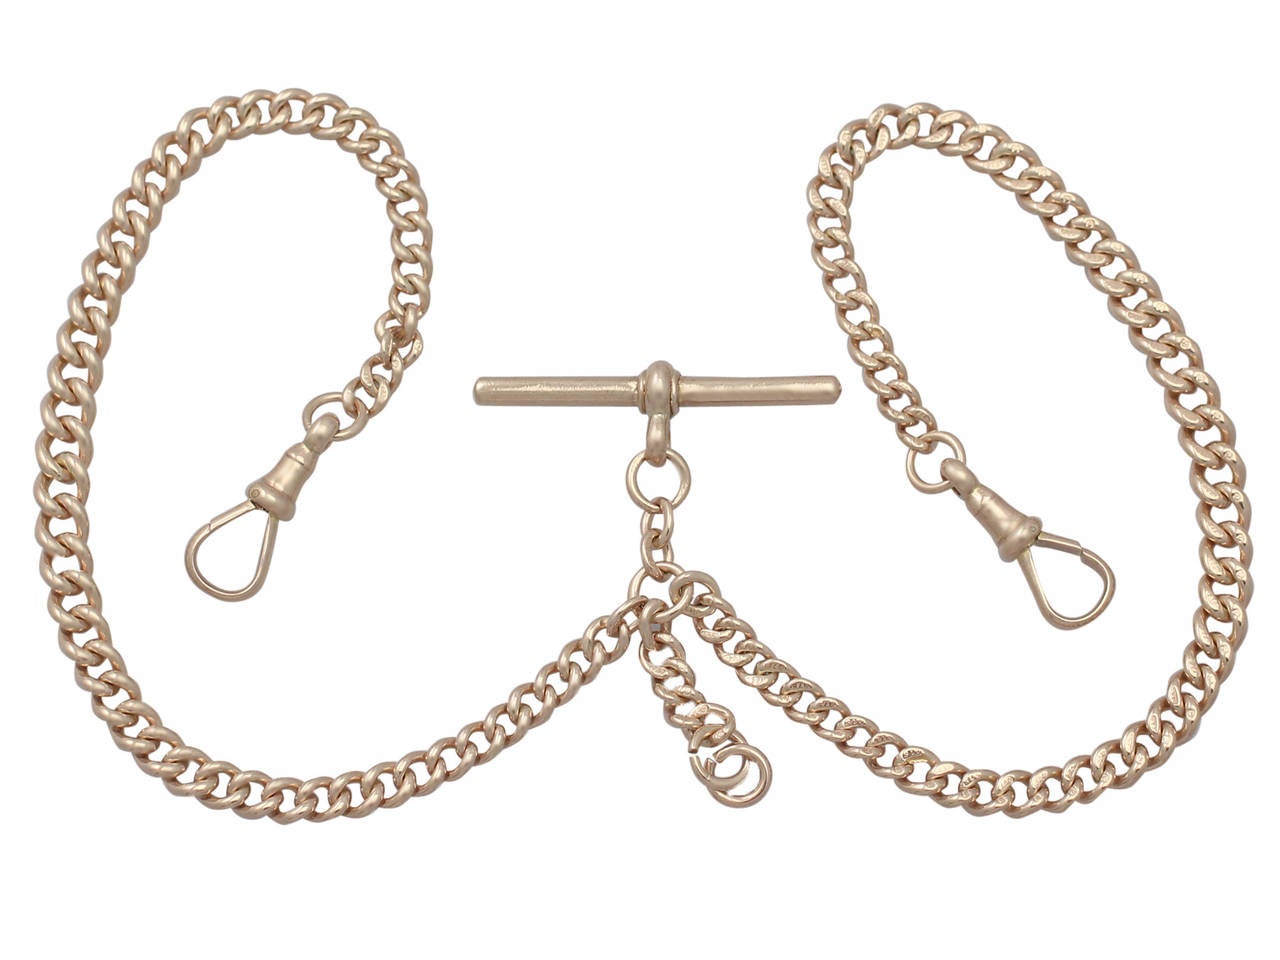 A fine and impressive antique 9 karat rose gold double Albert watch chain; part of our antique jewelry and estate jewelry collections

This impressive antique watch chain has been crafted in 9k rose gold.

The rounded curb links that make up this